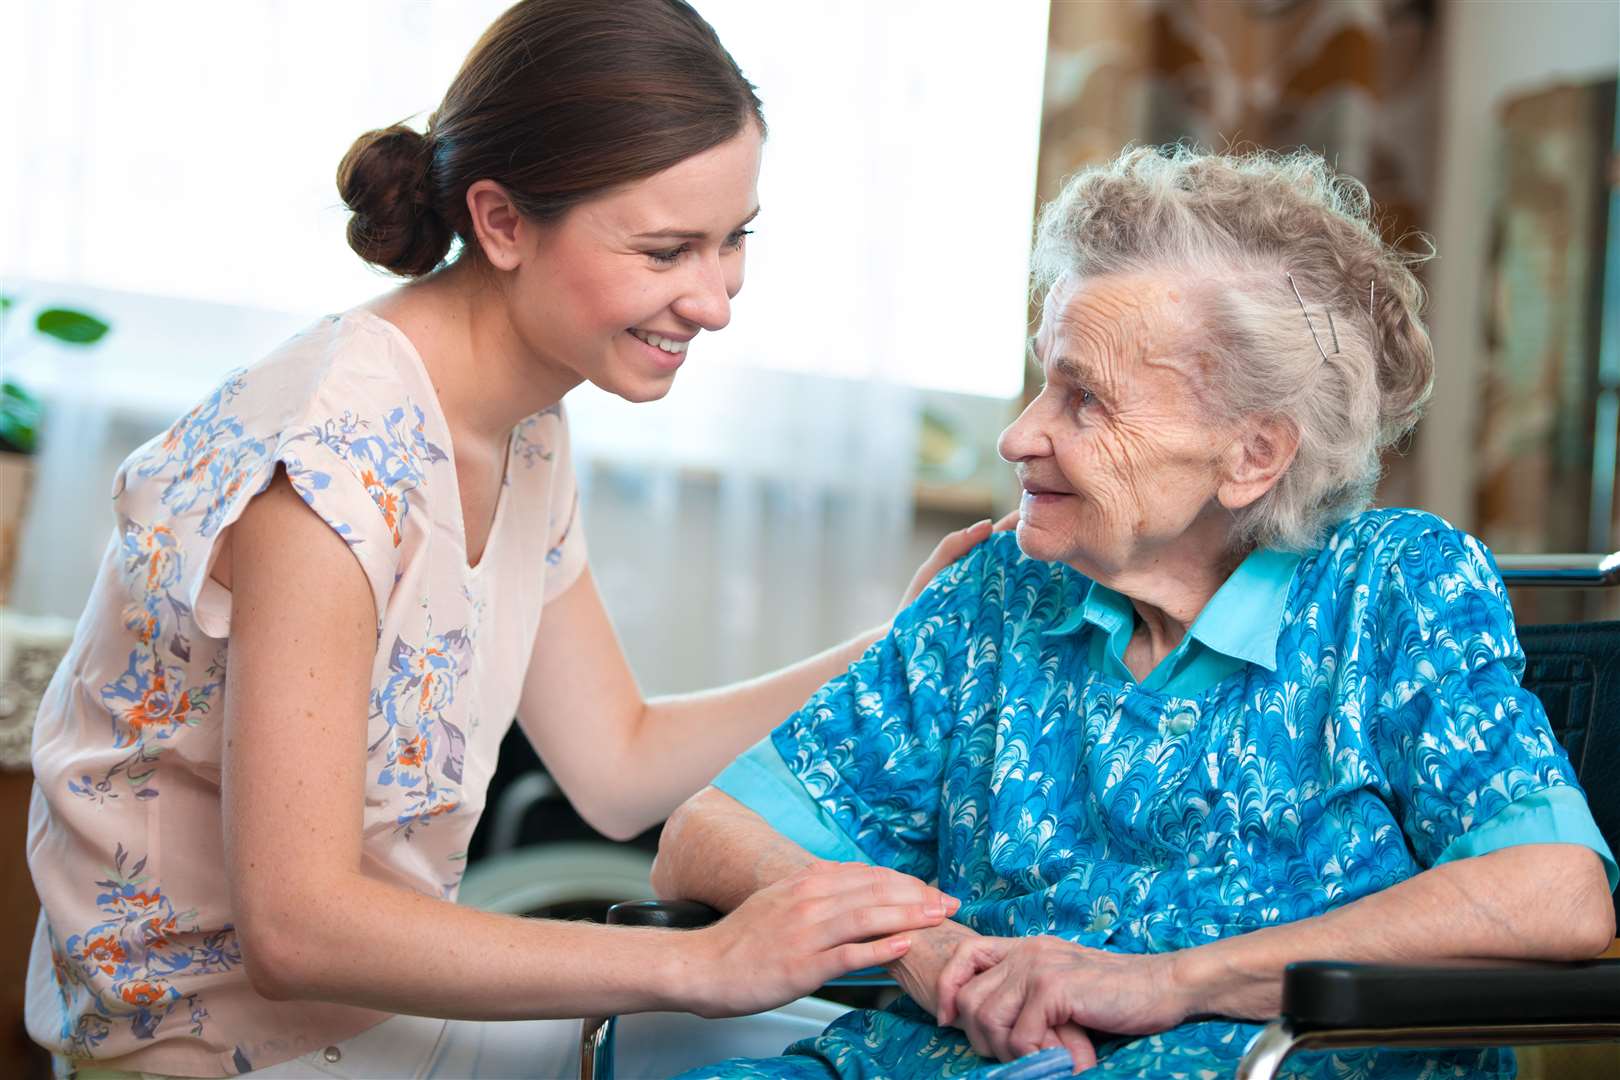 Bosses say their chief concern is the elderly people they care for. Stock image